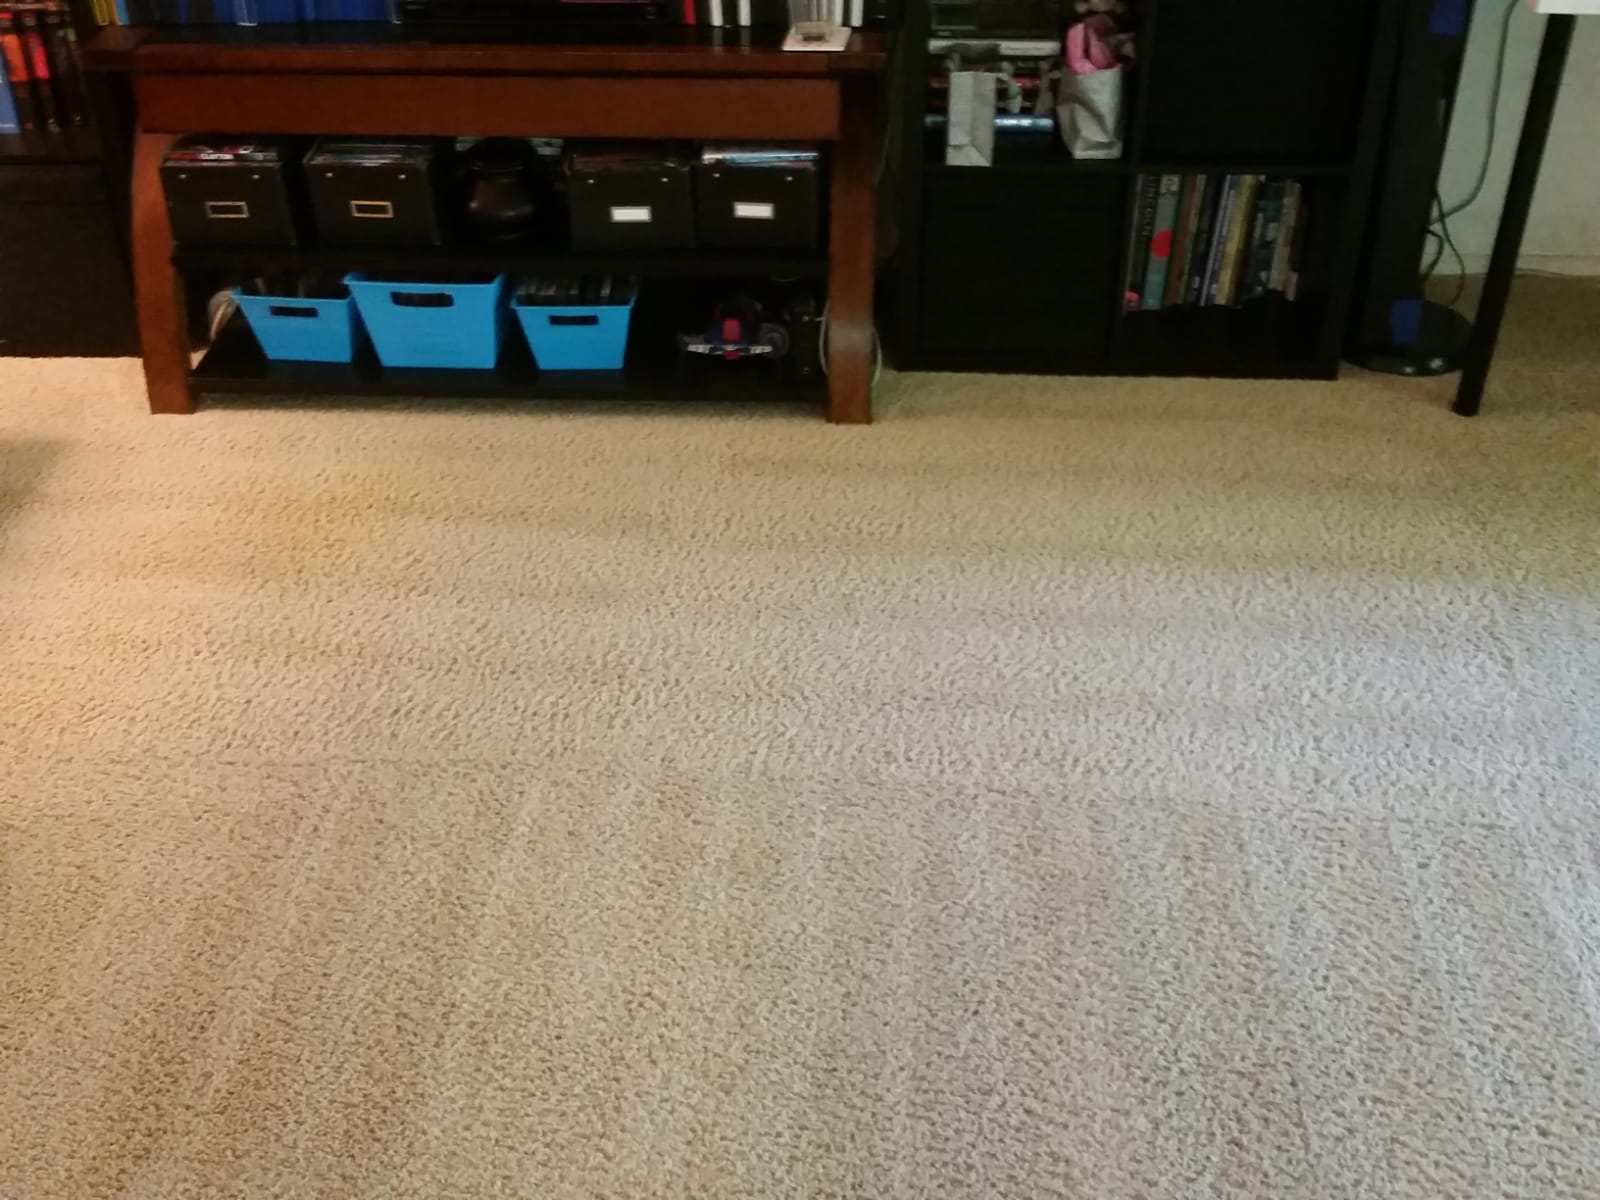 Carpet Cleaning - Stanley Steemer